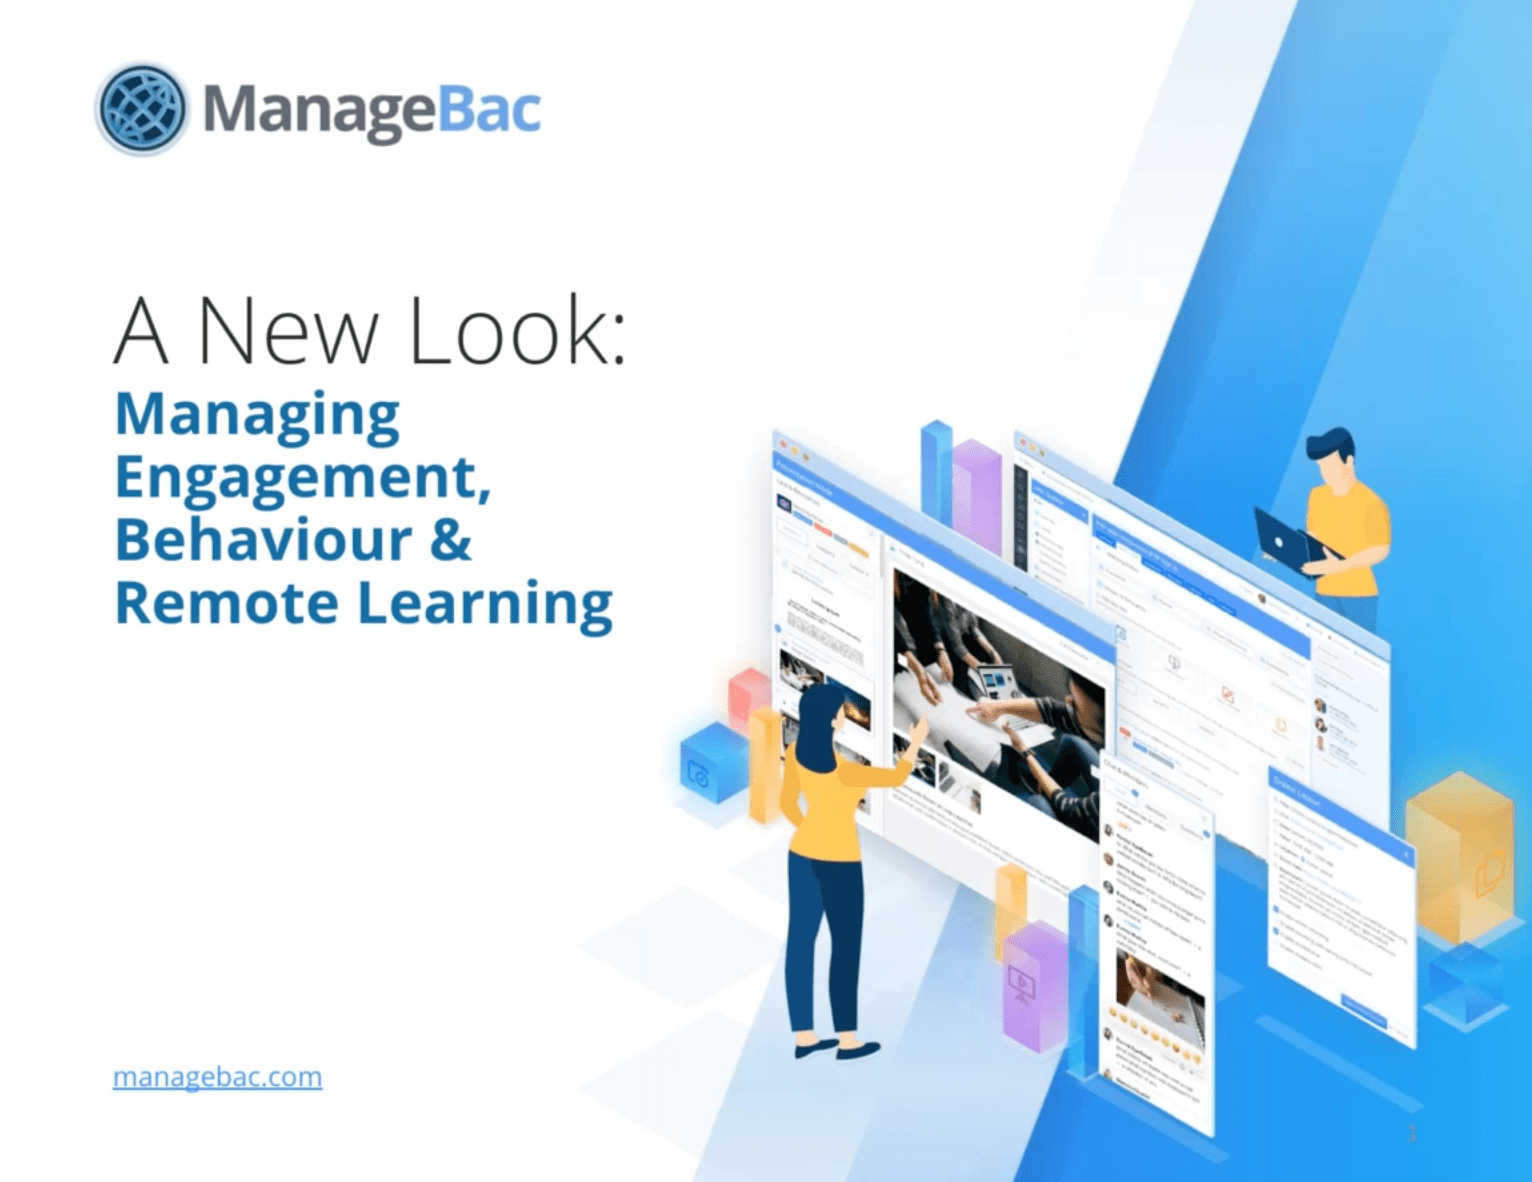 A New Look: Managing Engagement, Behaviour & Remote Learning